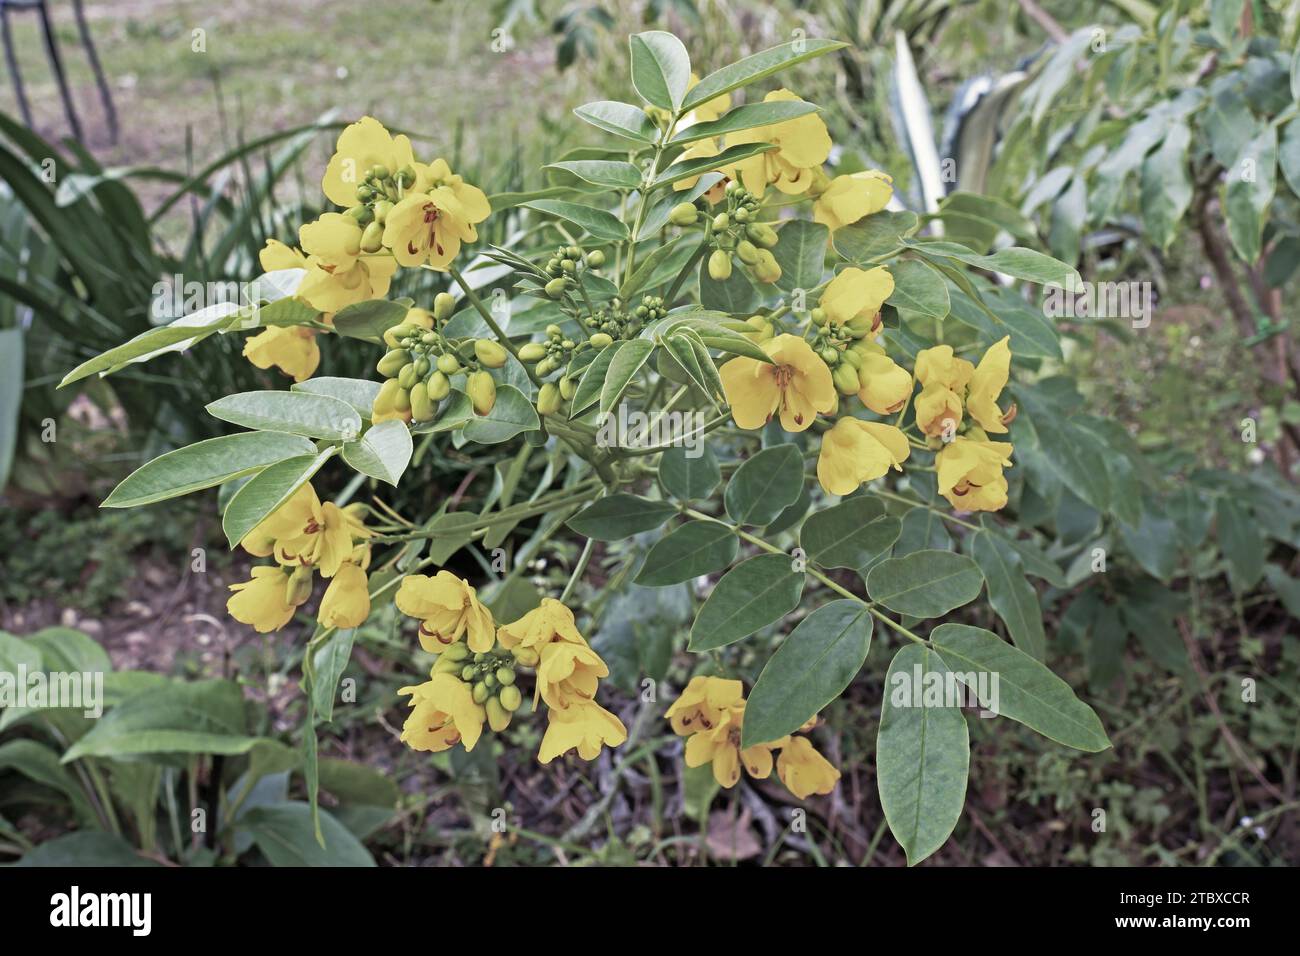 detail of an Argentine senna plant in bloom, flowers and leaves, Senna corymbosa, Cassia corymbosa, Fabaceae Stock Photo